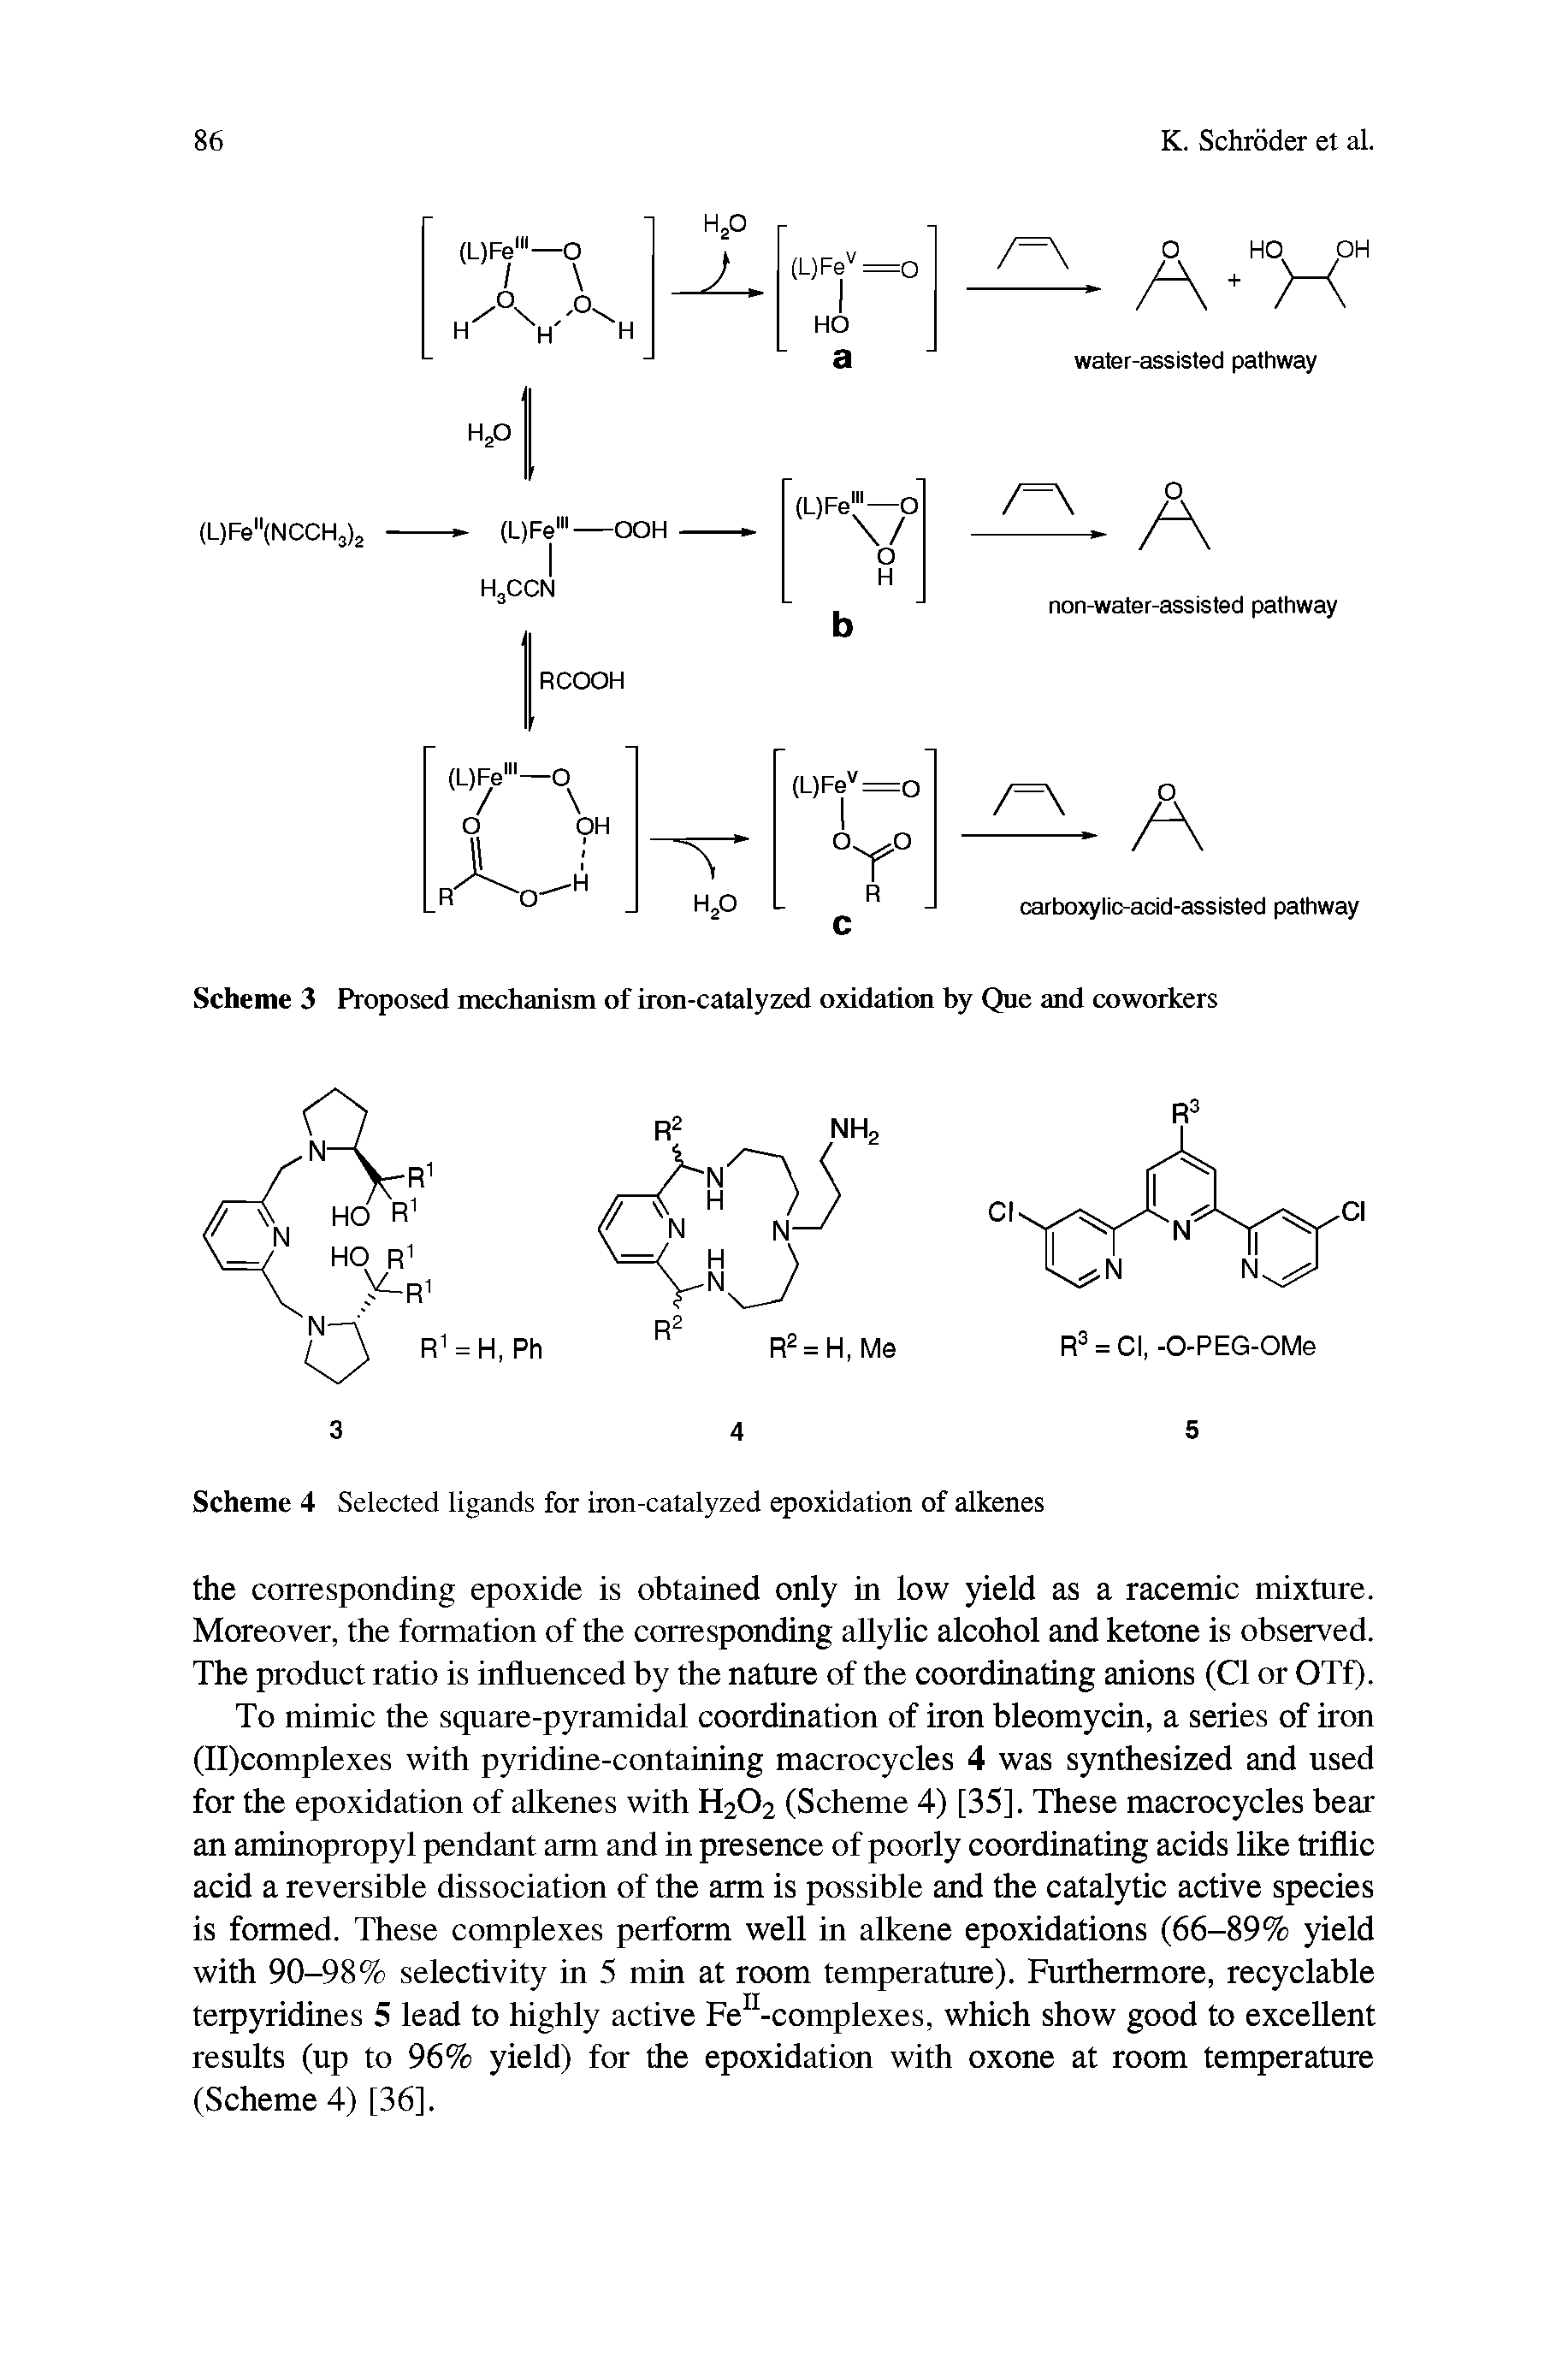 Scheme 3 Proposed mechanism of iron-catalyzed oxidation by Que and coworkers...